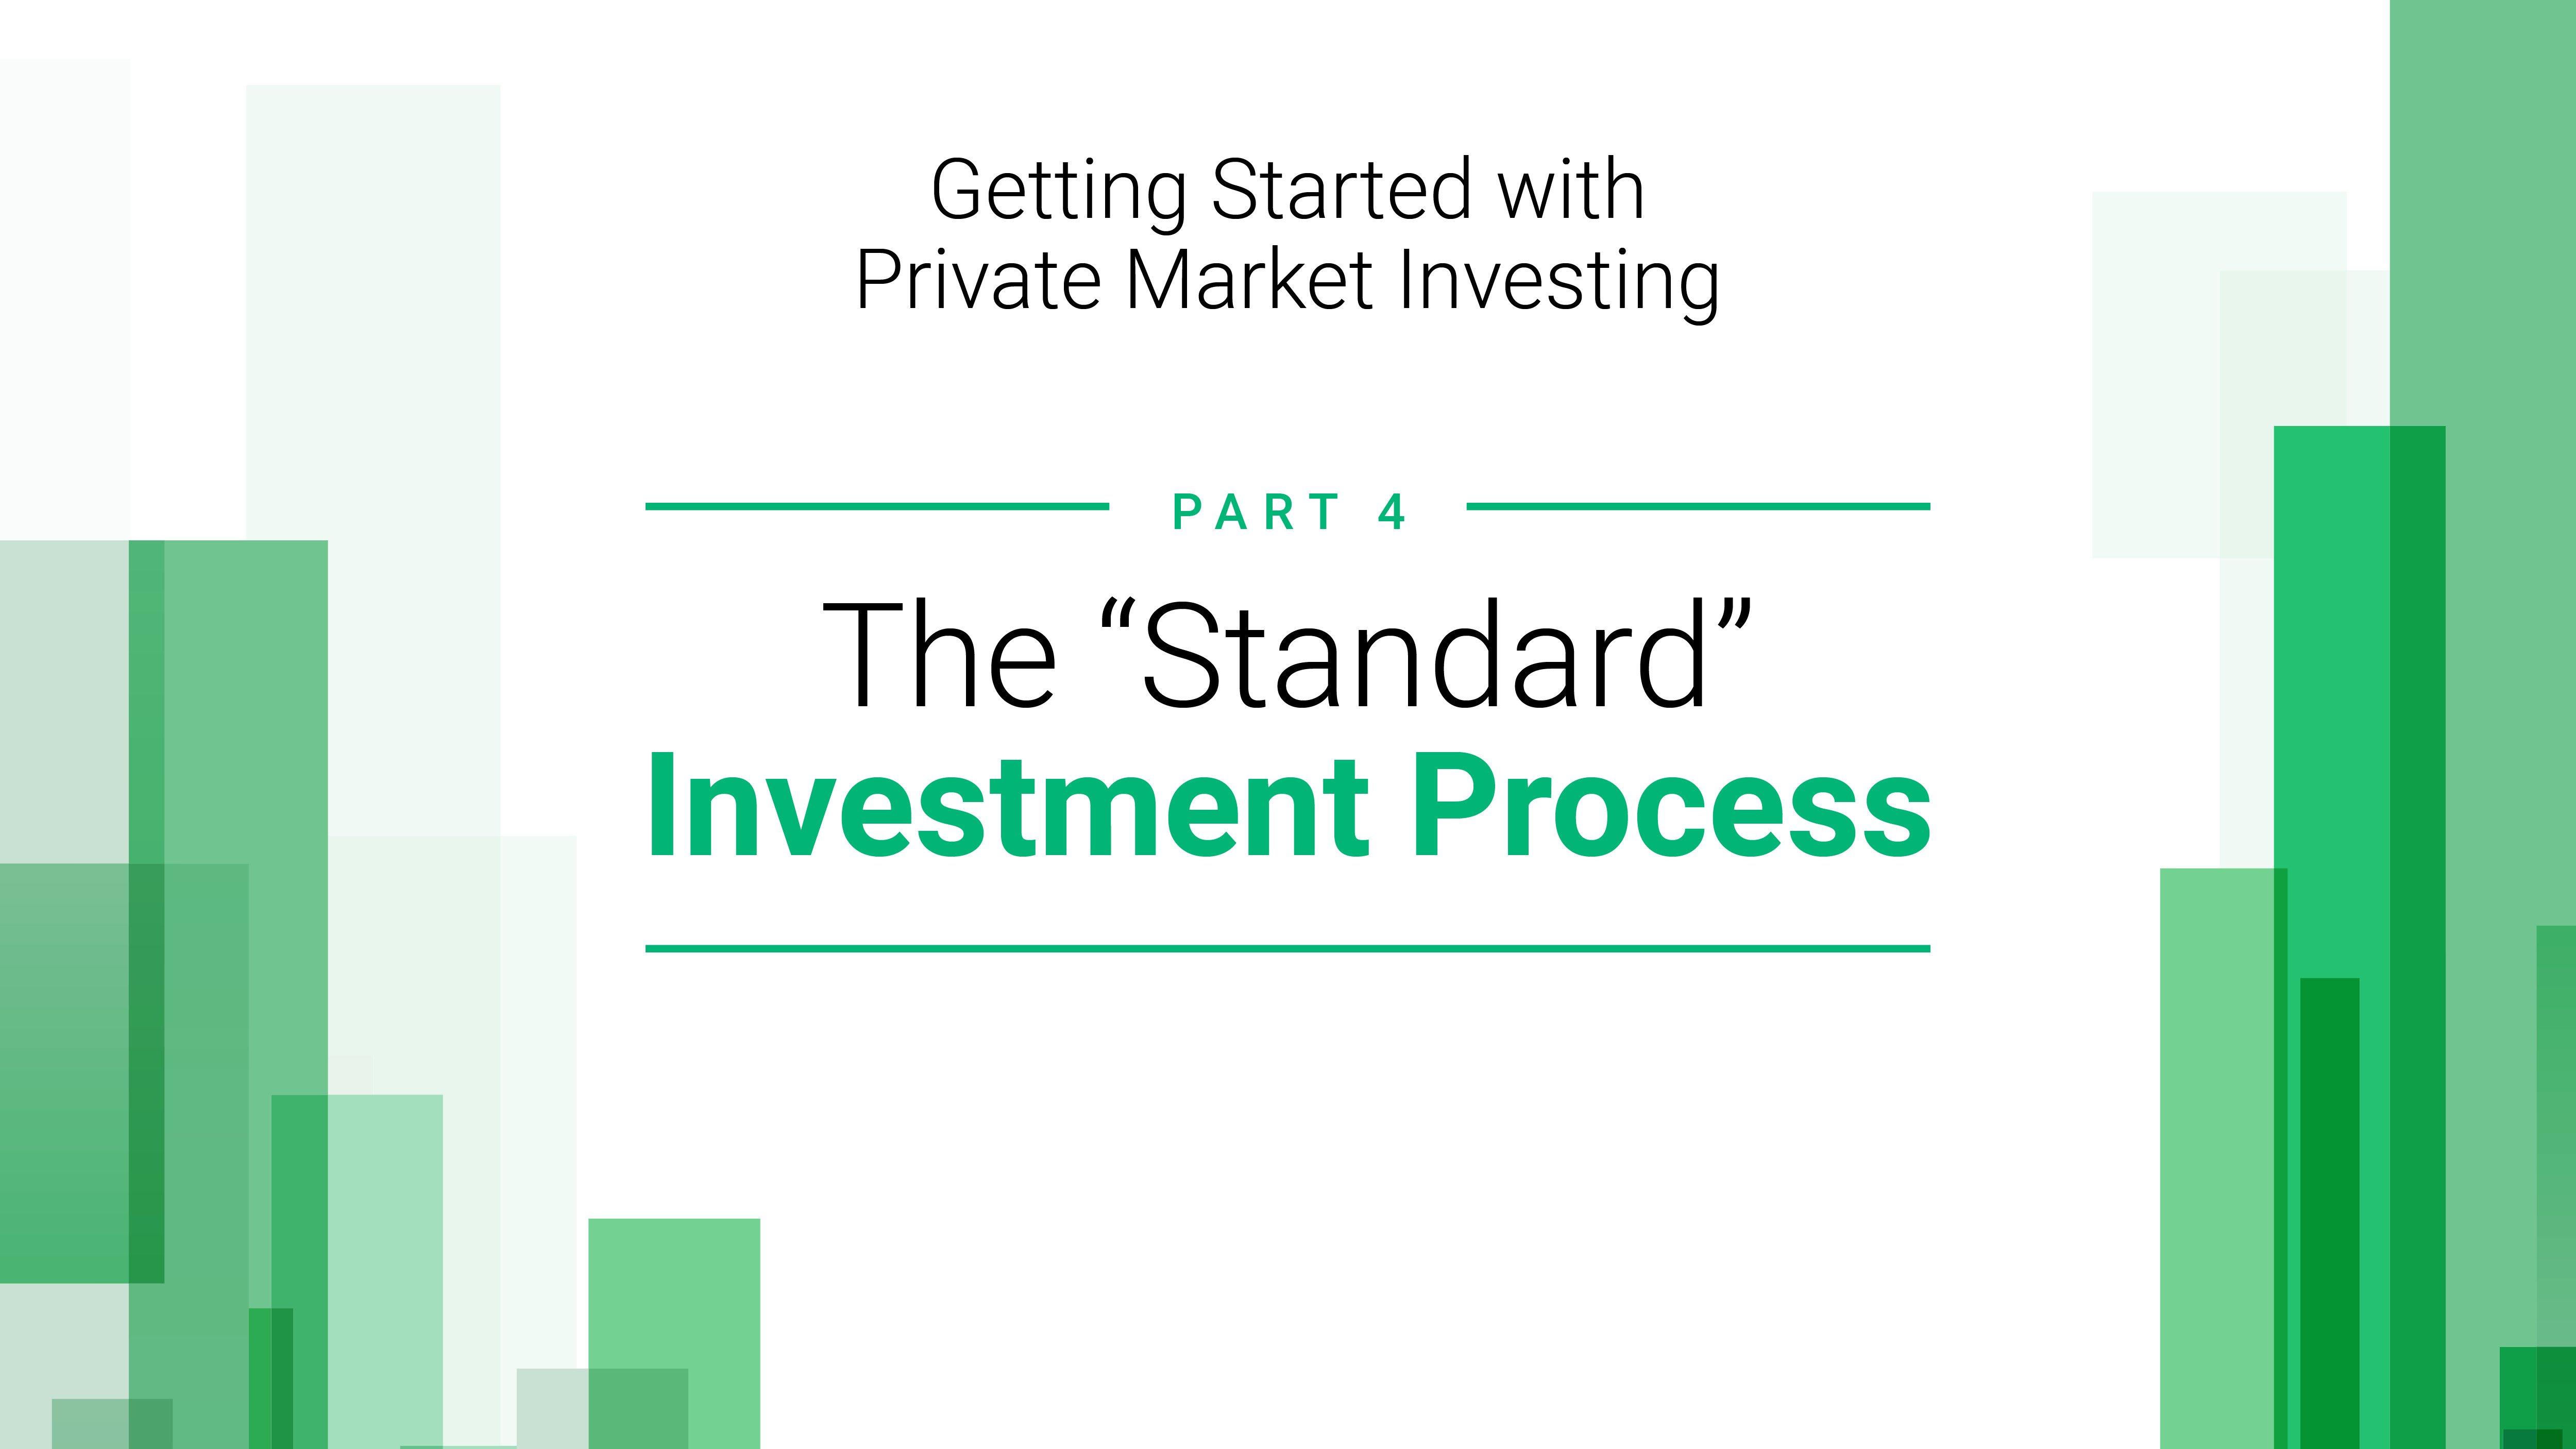 Getting Started with Private Market Investing: Part IV - The "Standard" Investment Process